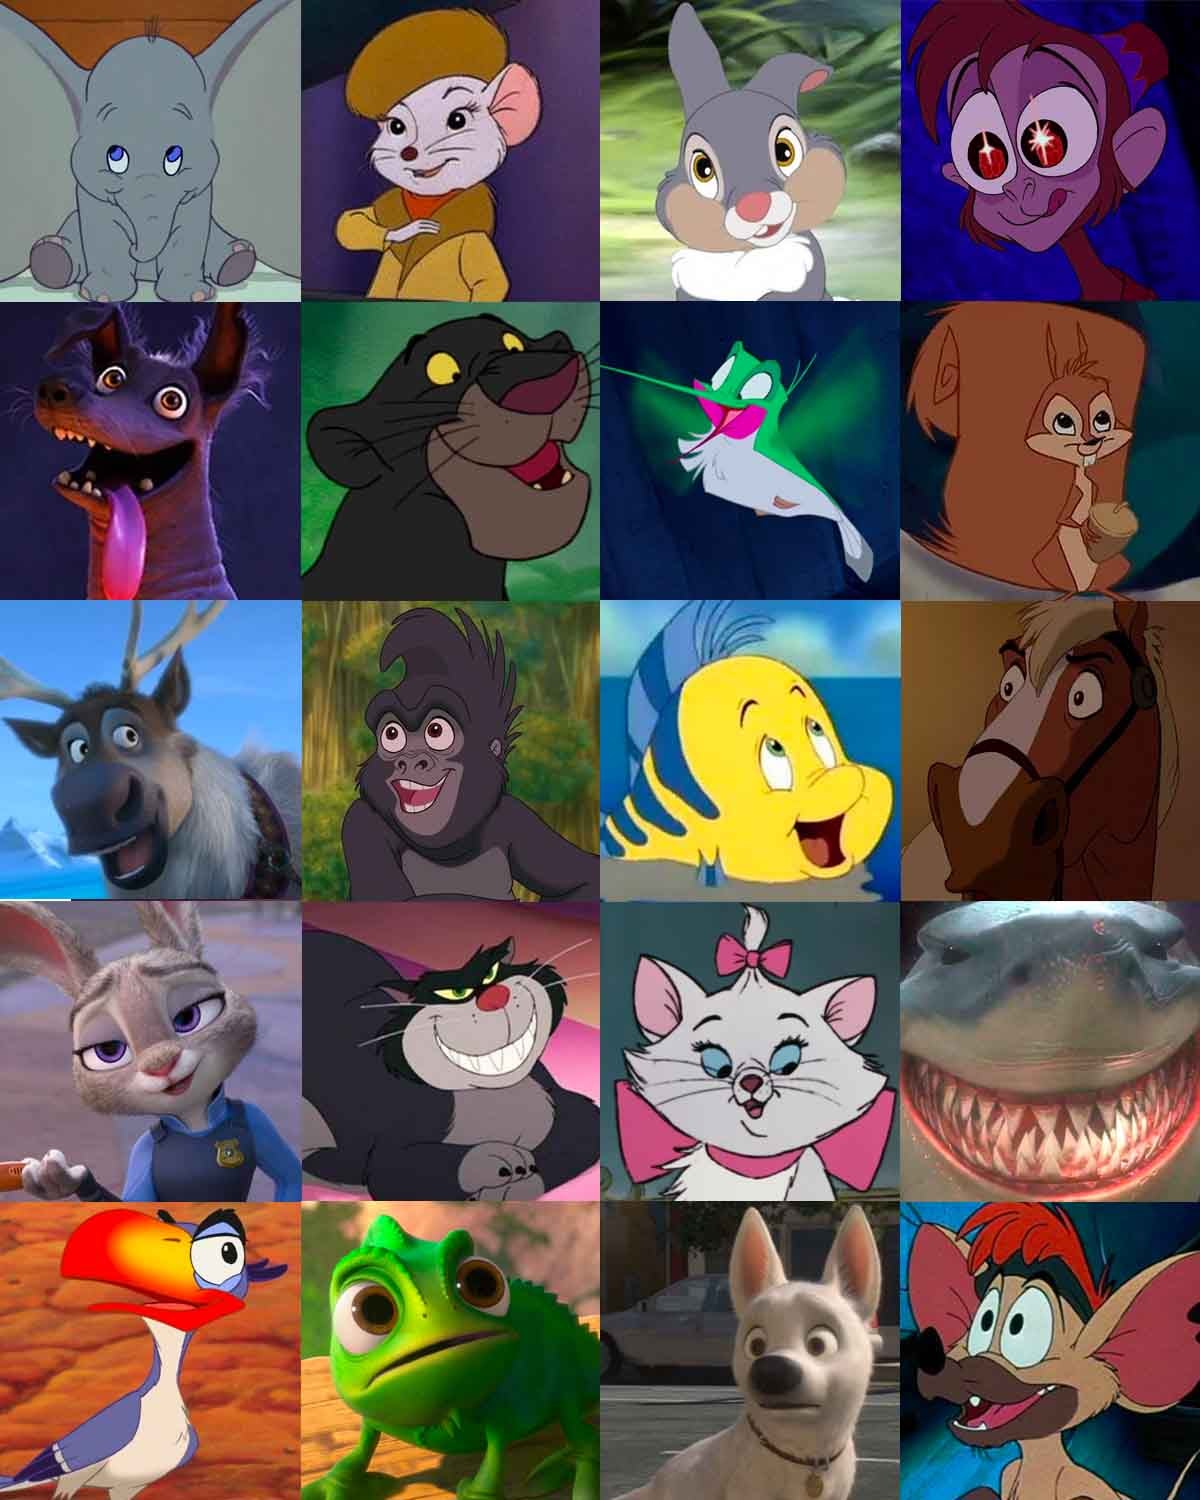 How Many Of These Disney Animals Can You Identify?